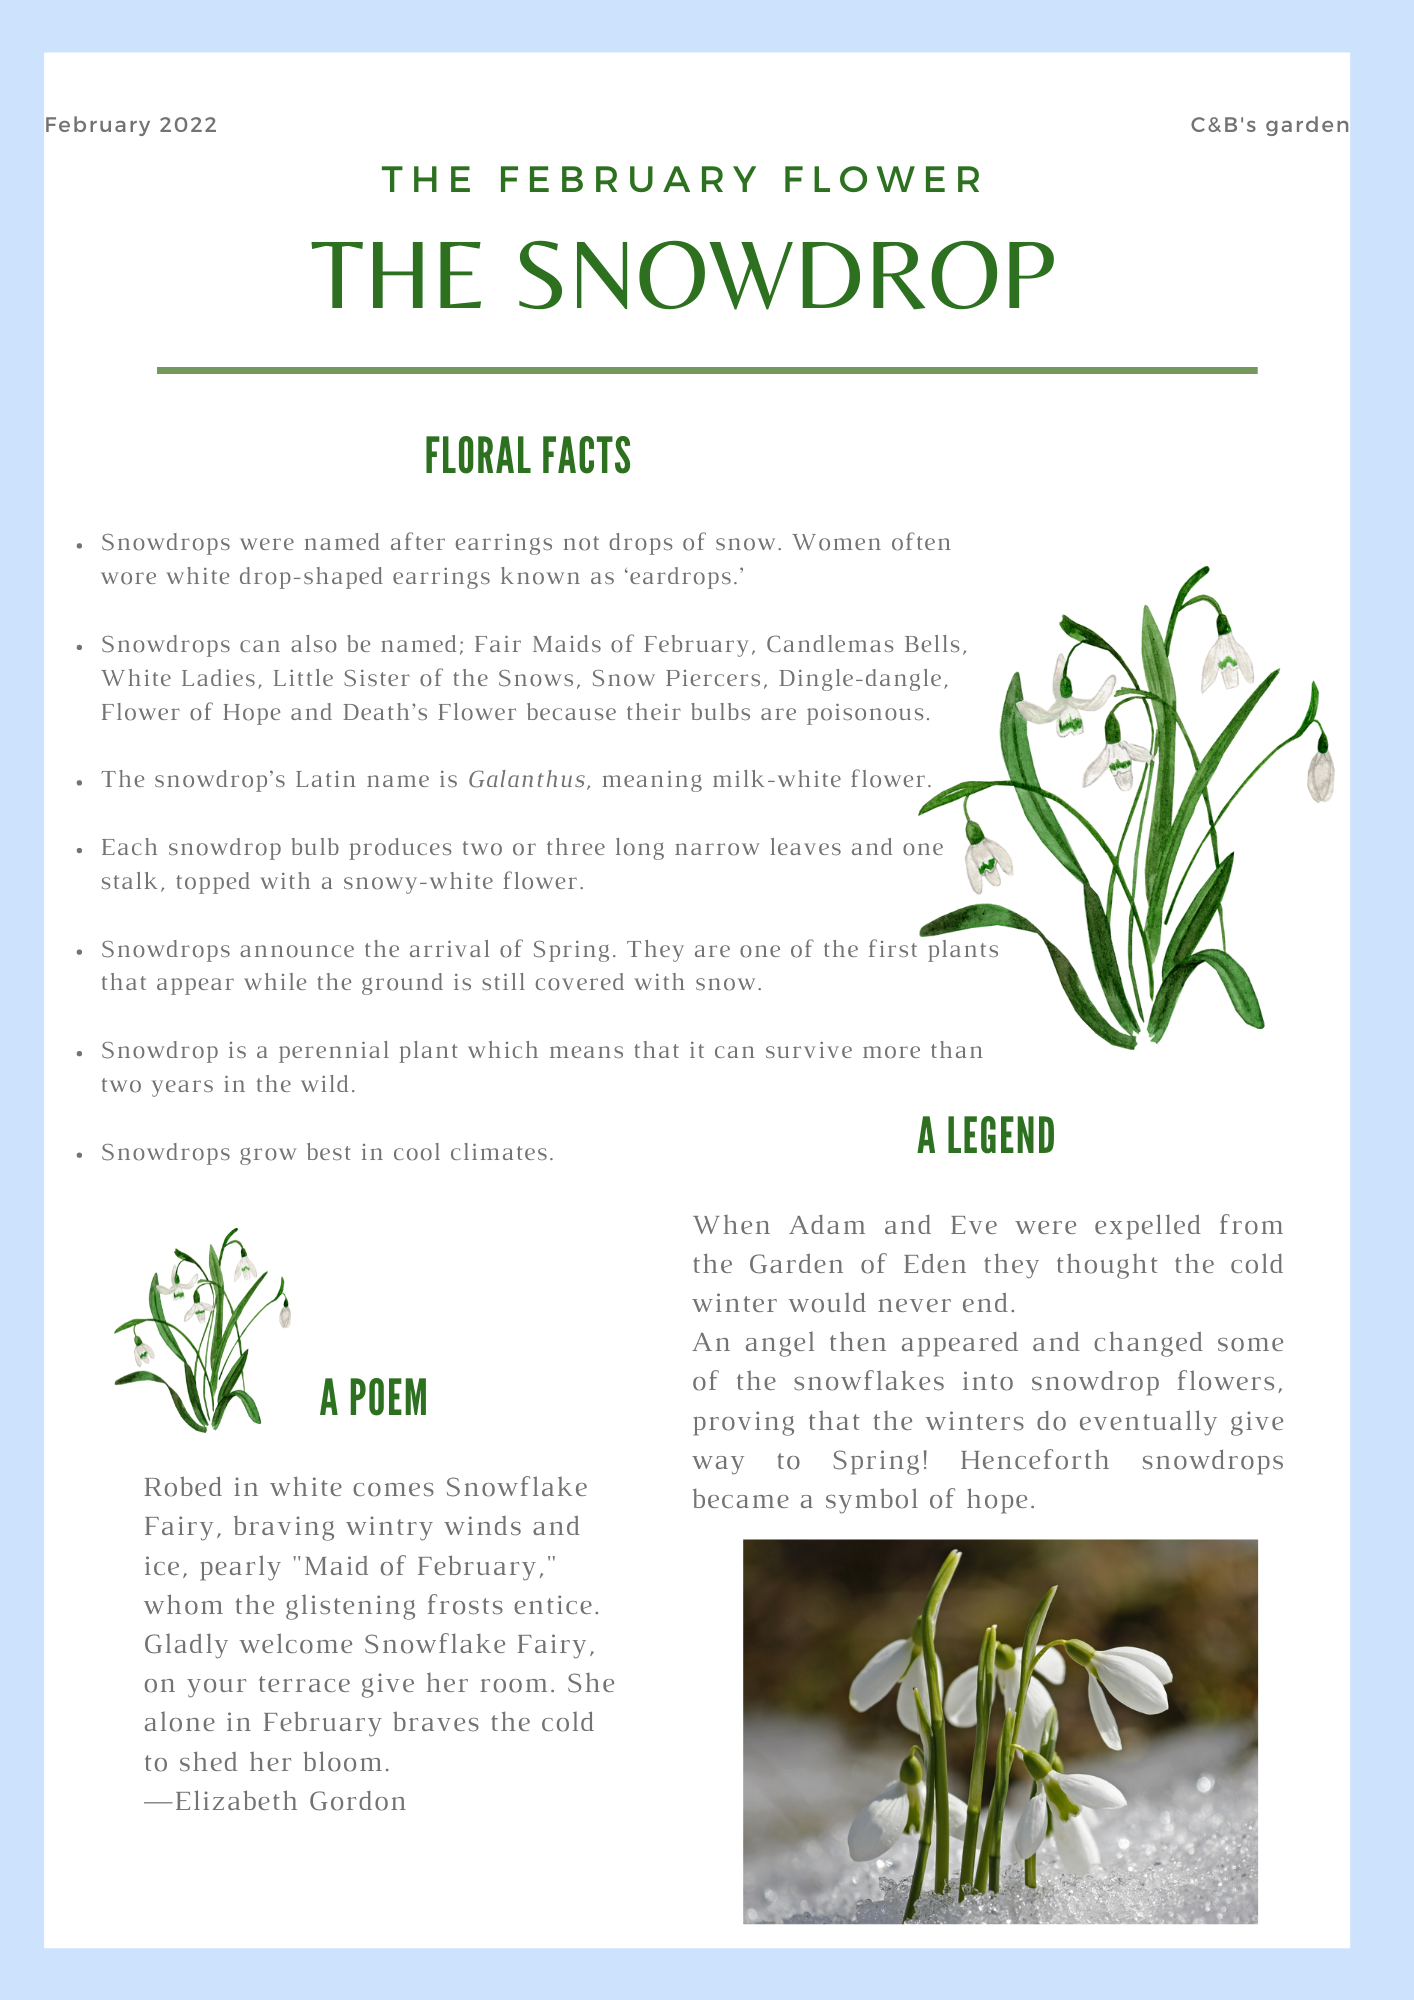 Fun facts about flowers for children - Learn all about the snowdrop - Charlotte and Burlington family club